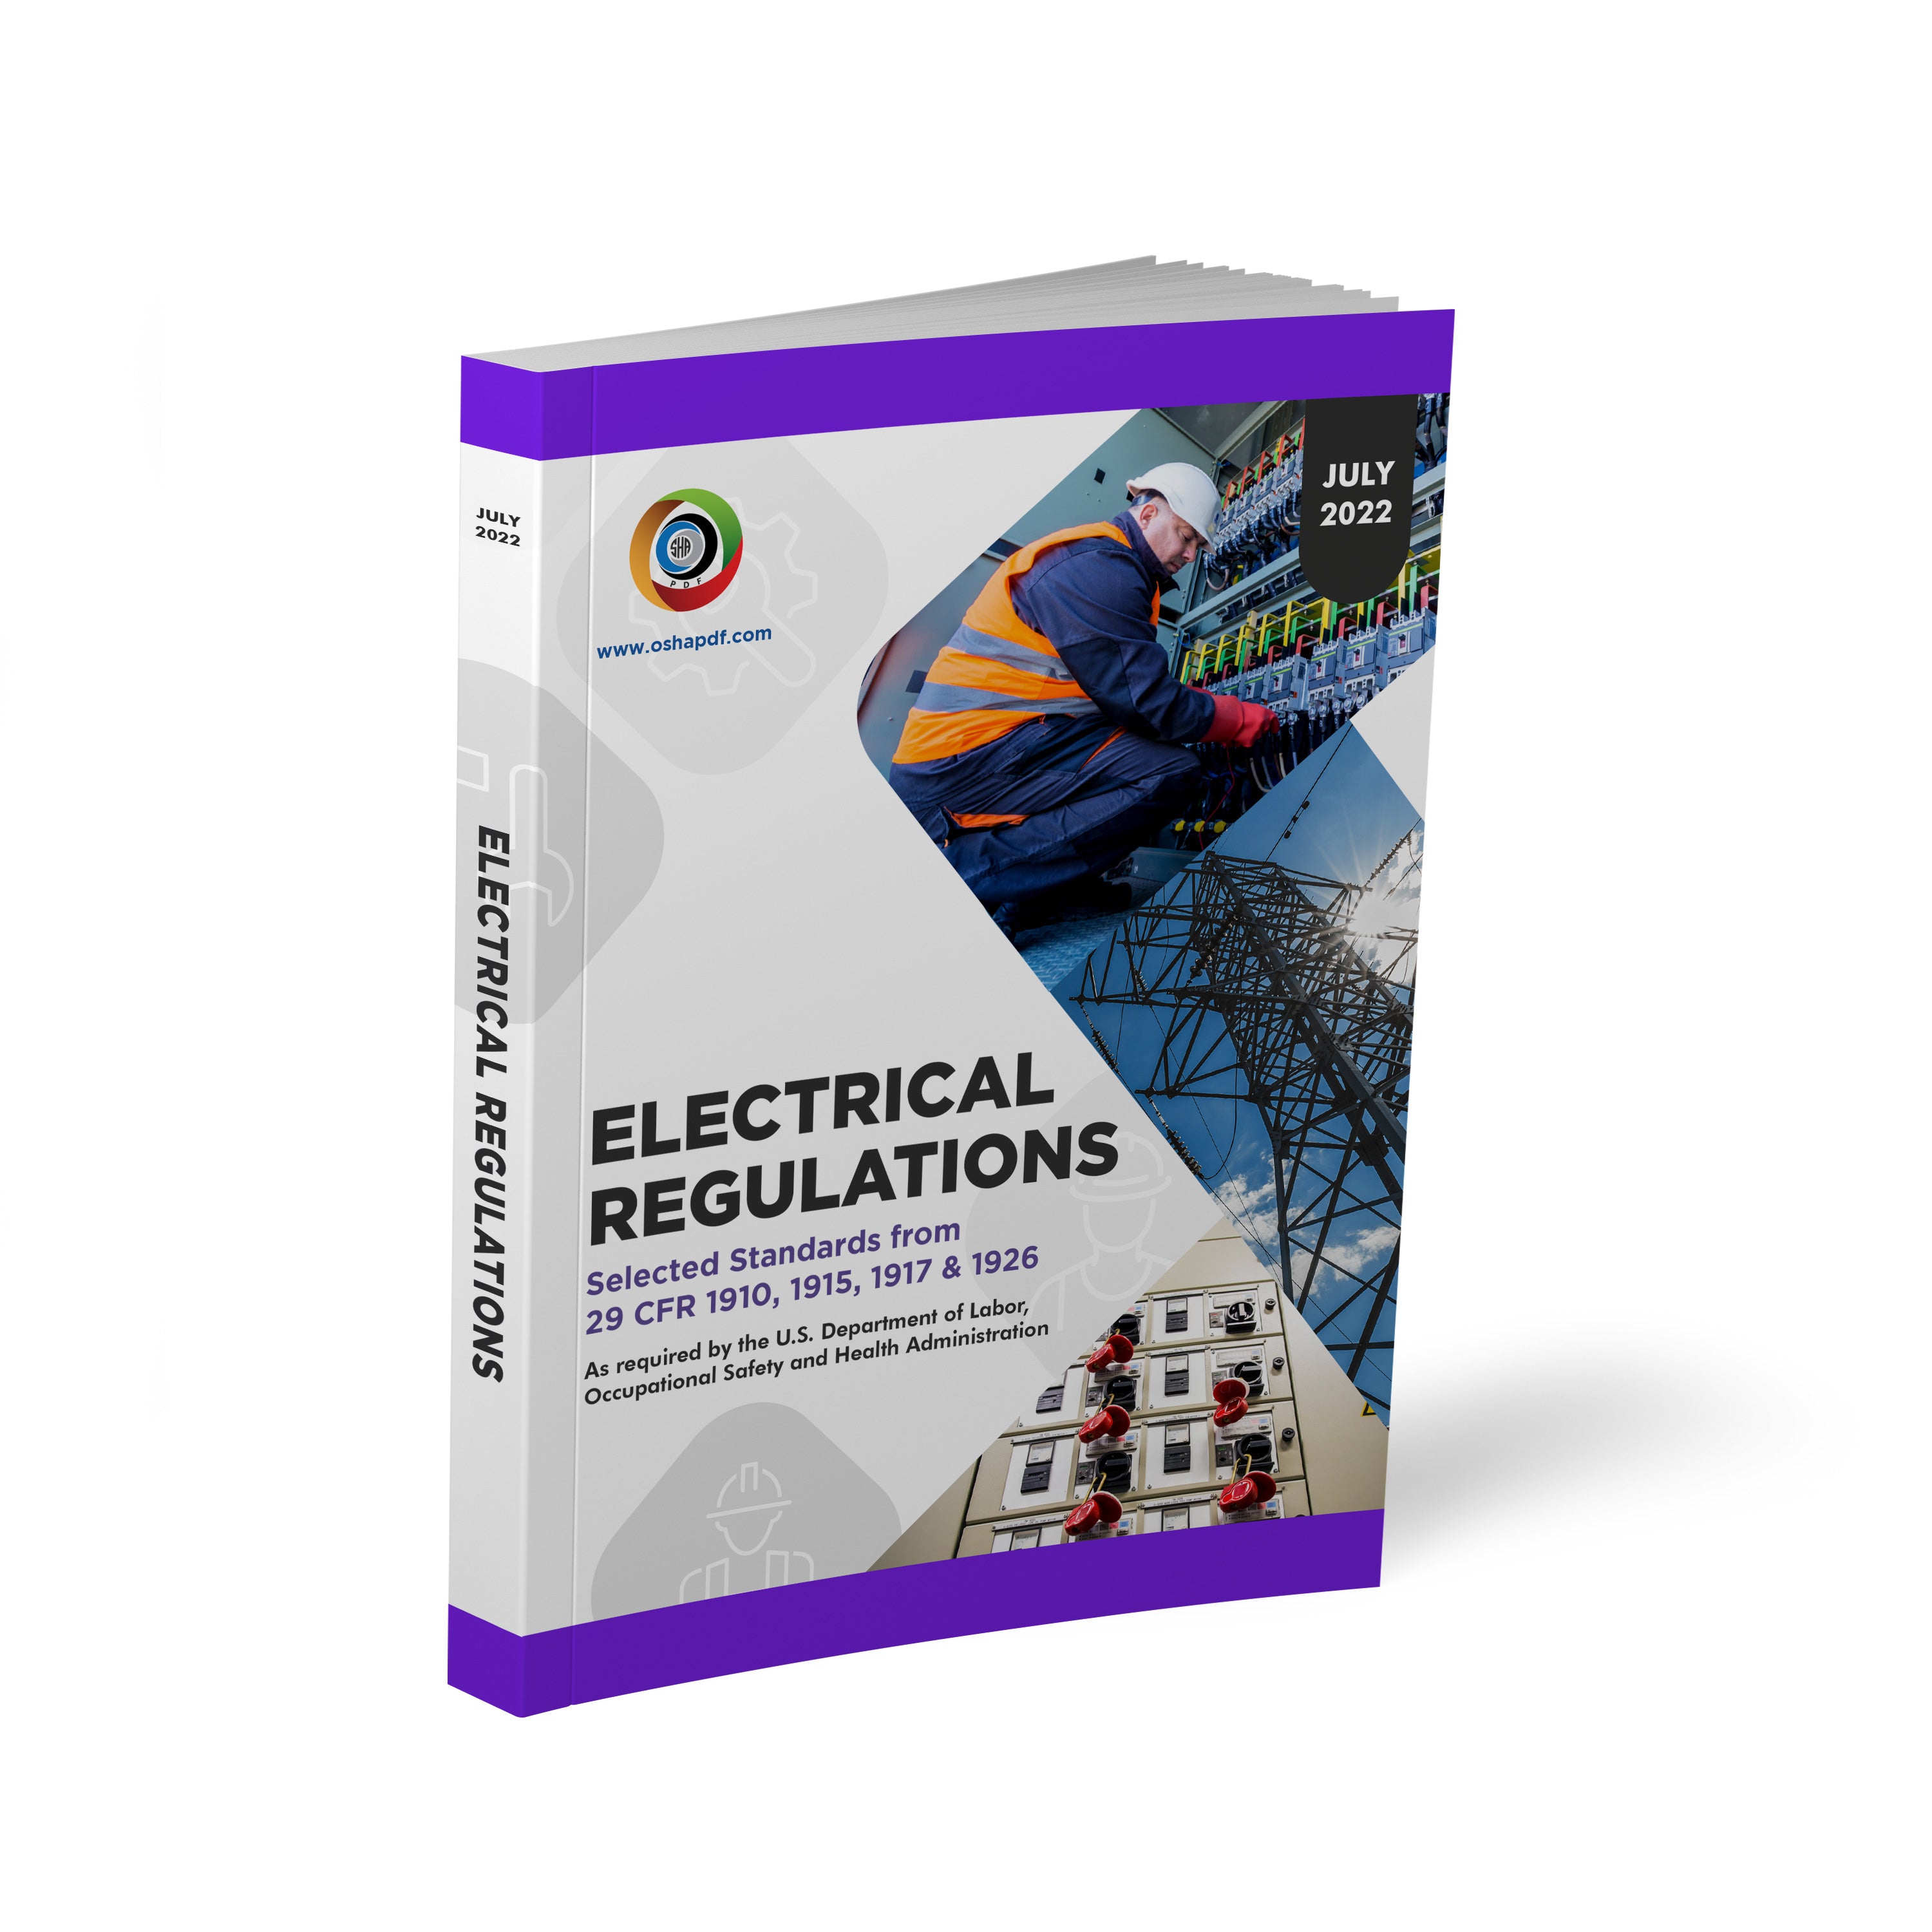 Electrical Regulations Book - July 2022